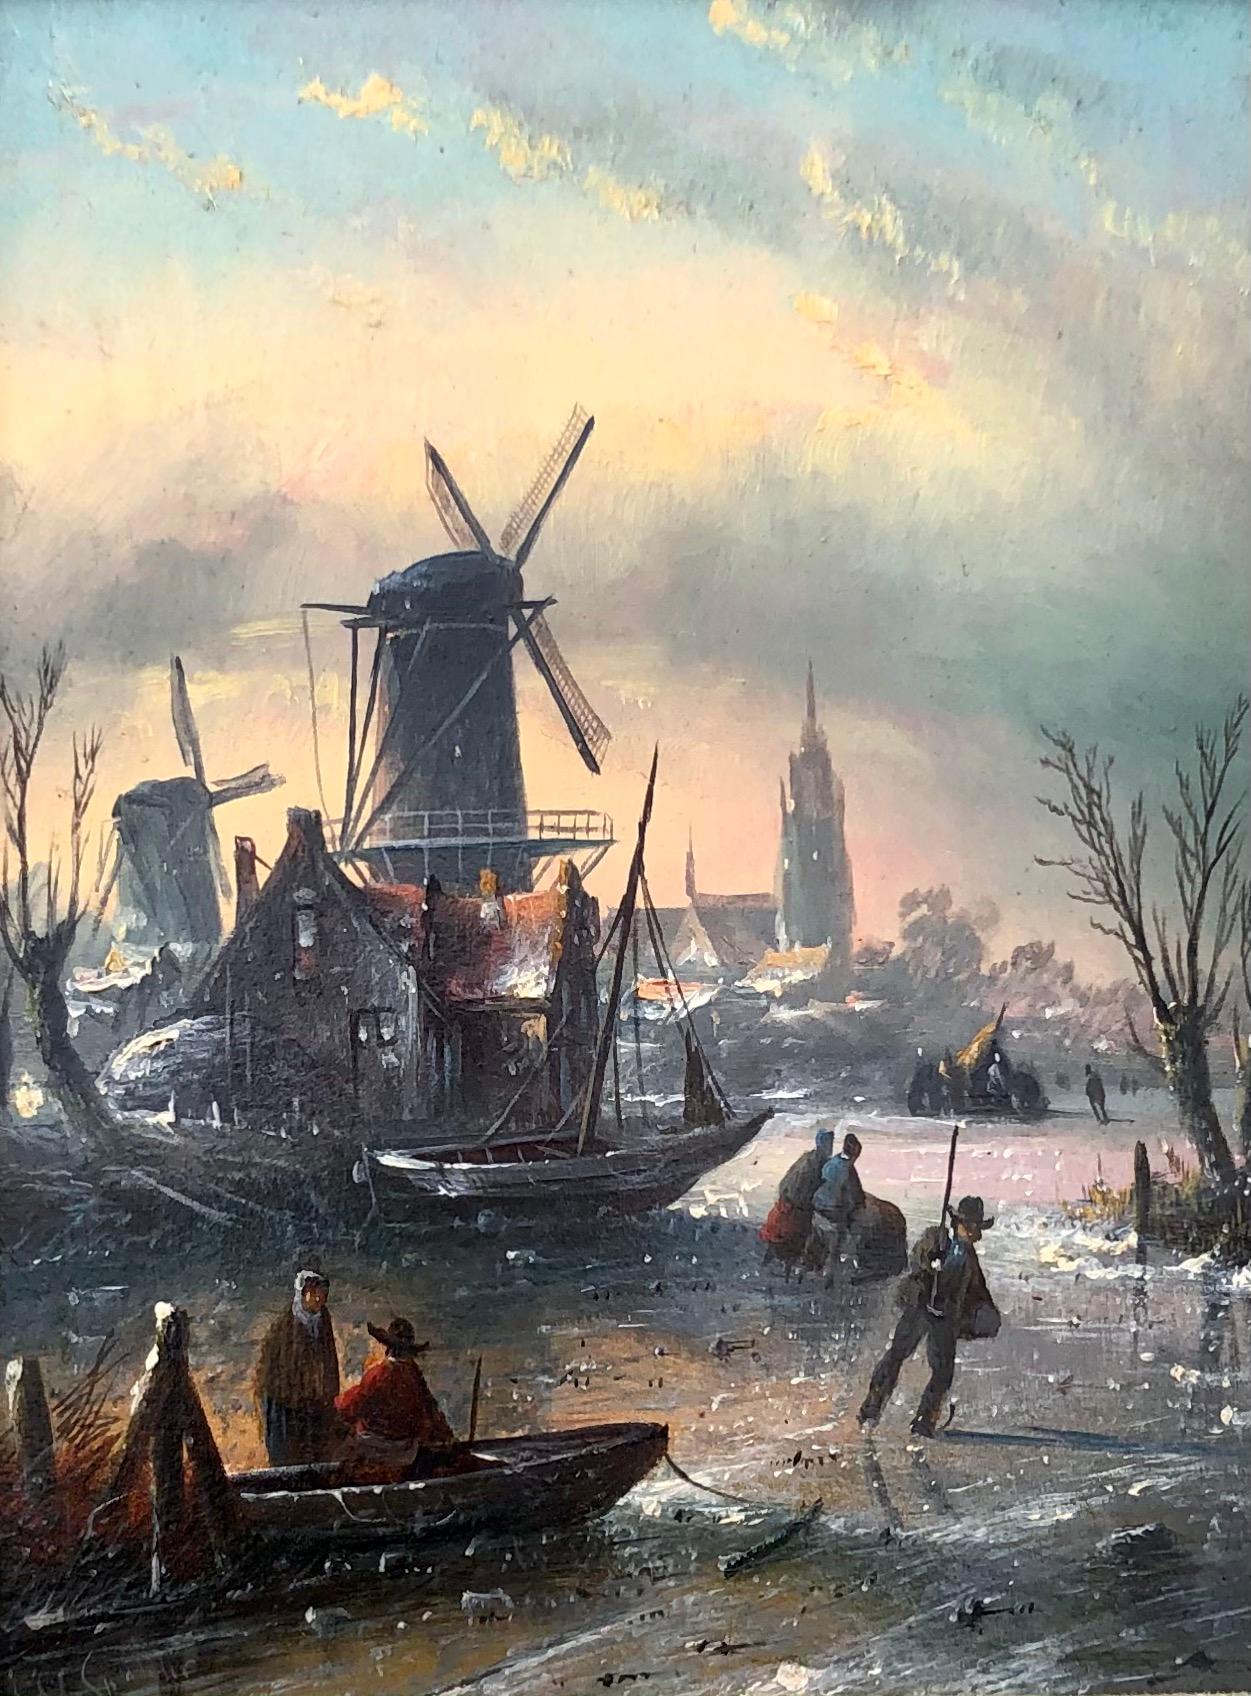 On the Frozen Canal - Painting by Jan Jacob Coenraad Spohler